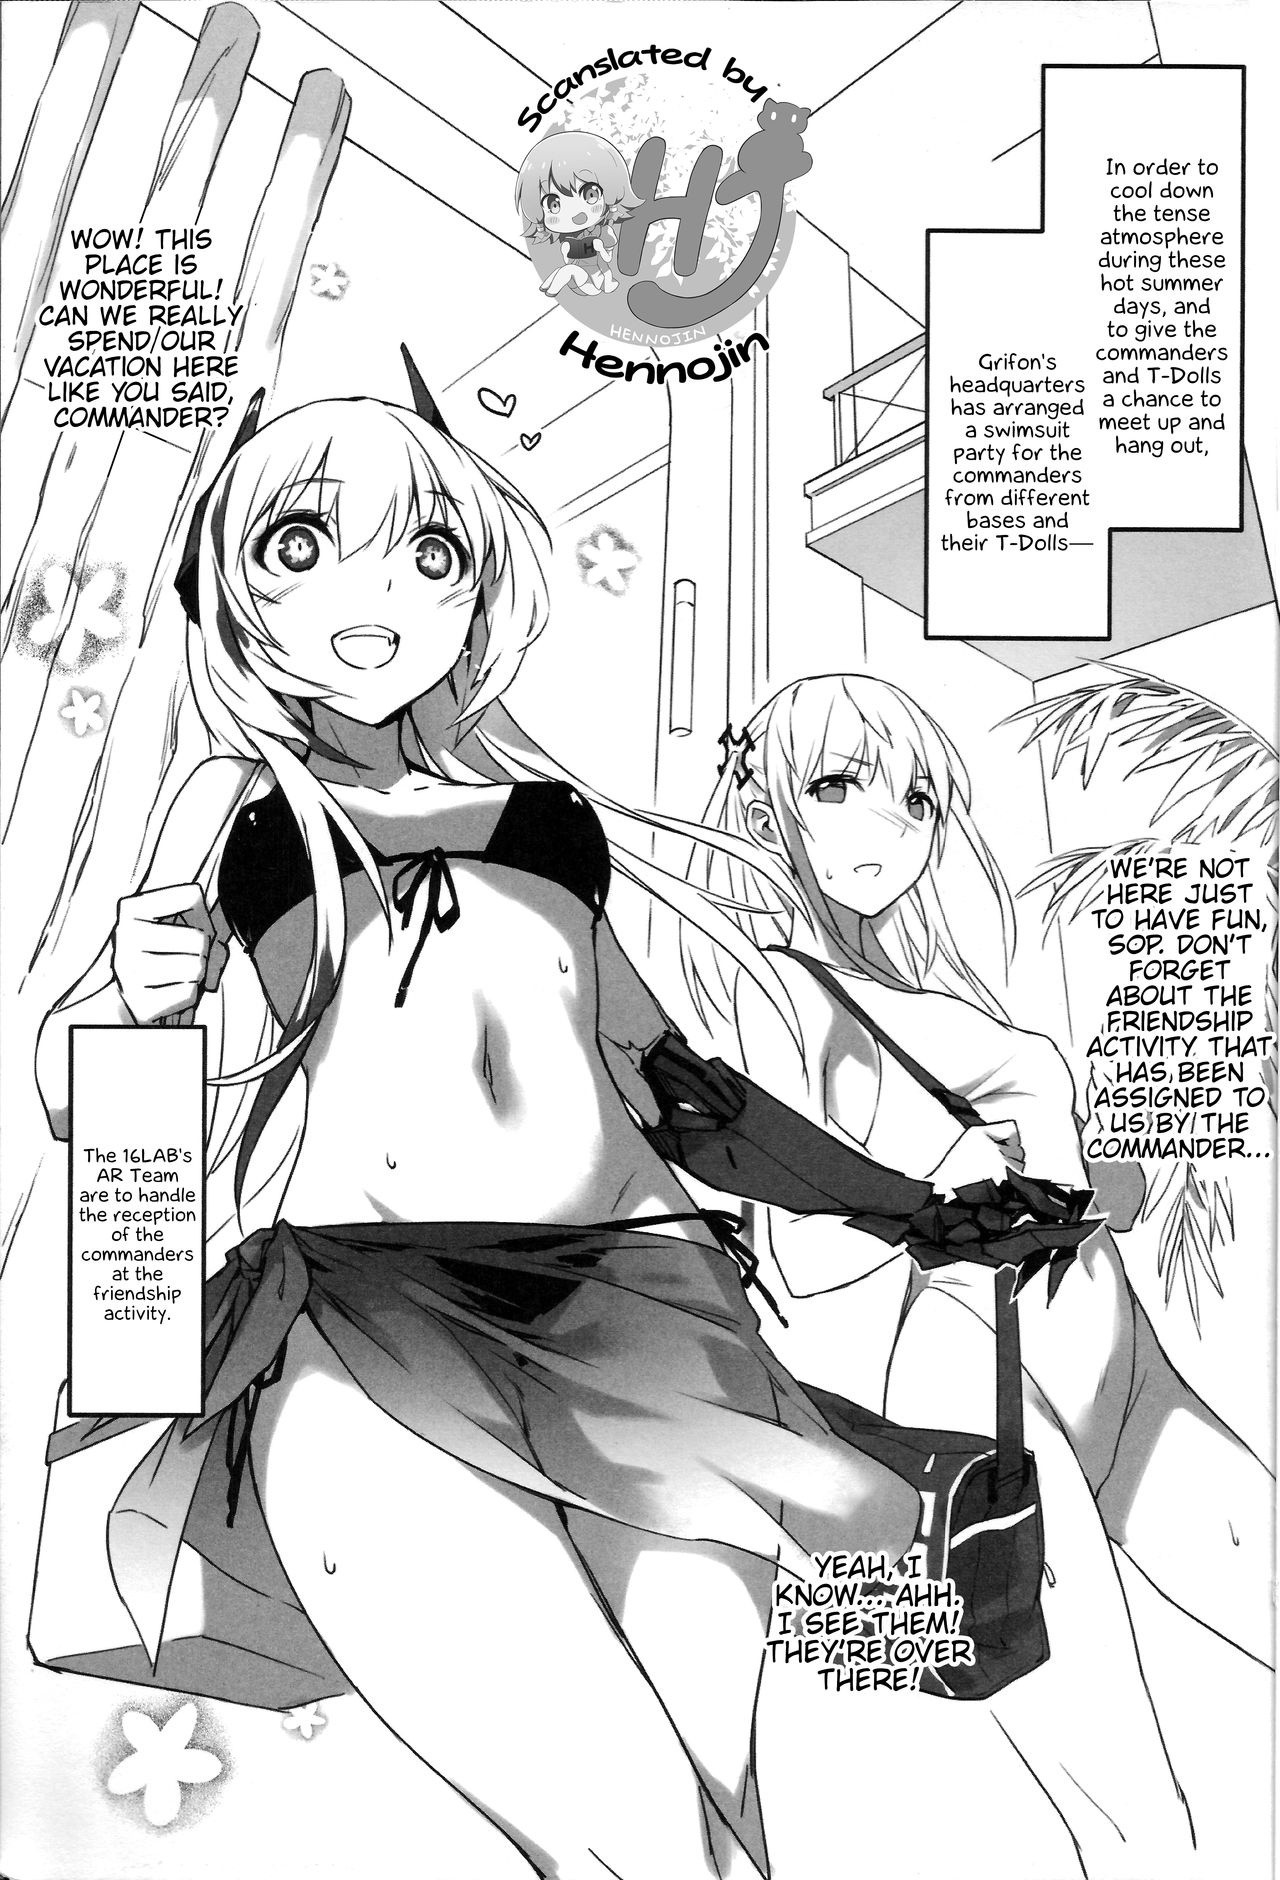 Grifon Summer Swimsuit Sex Party hentai manga picture 2